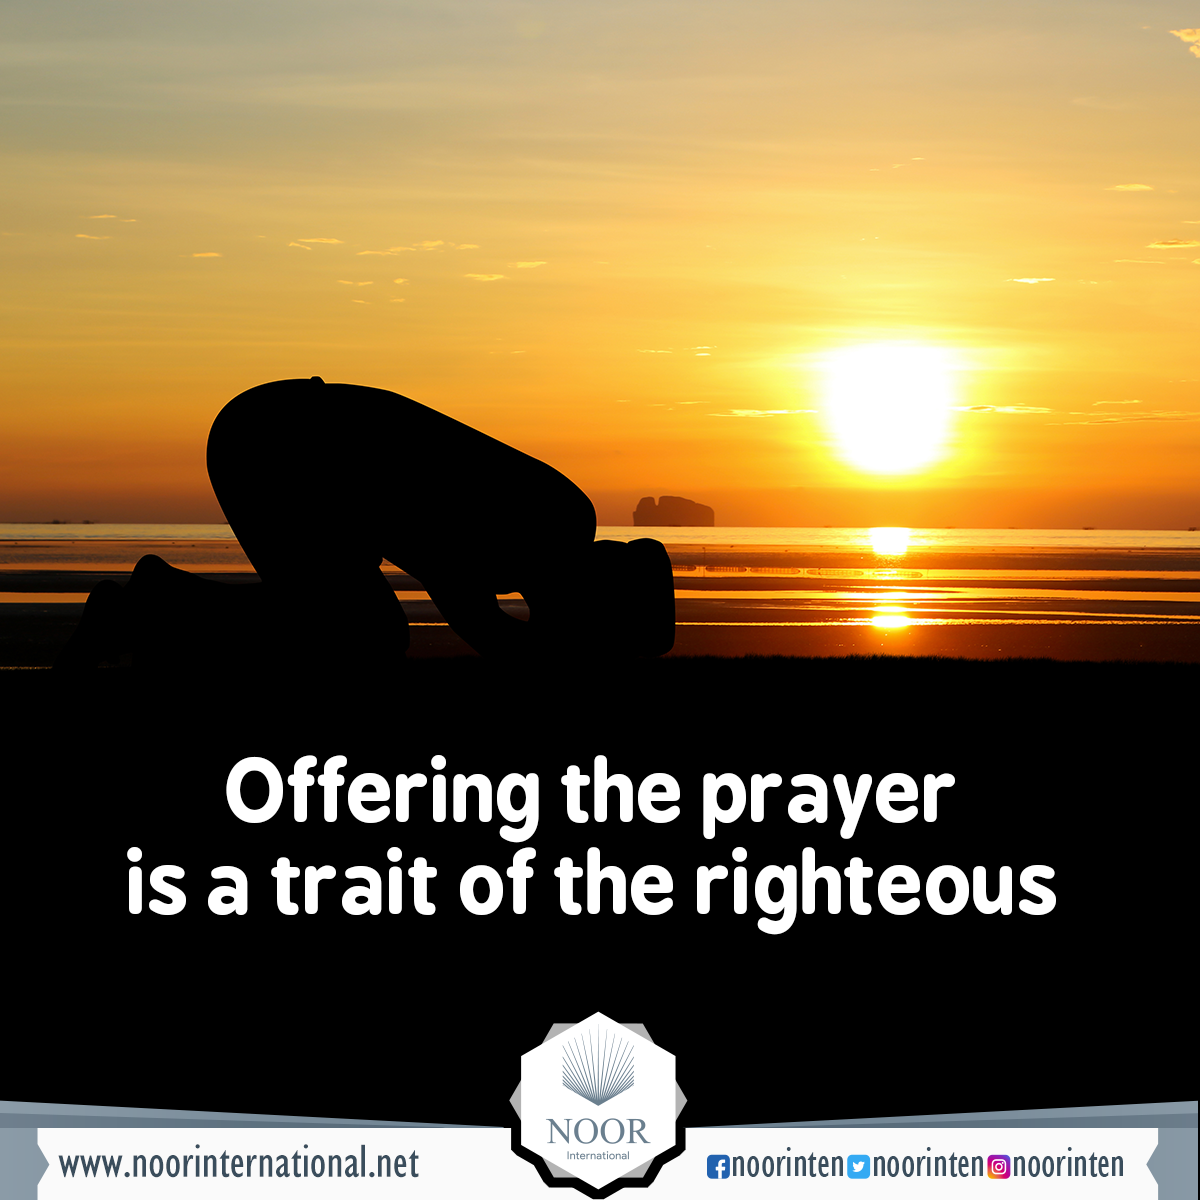 Offering the prayer is a trait of the righteous